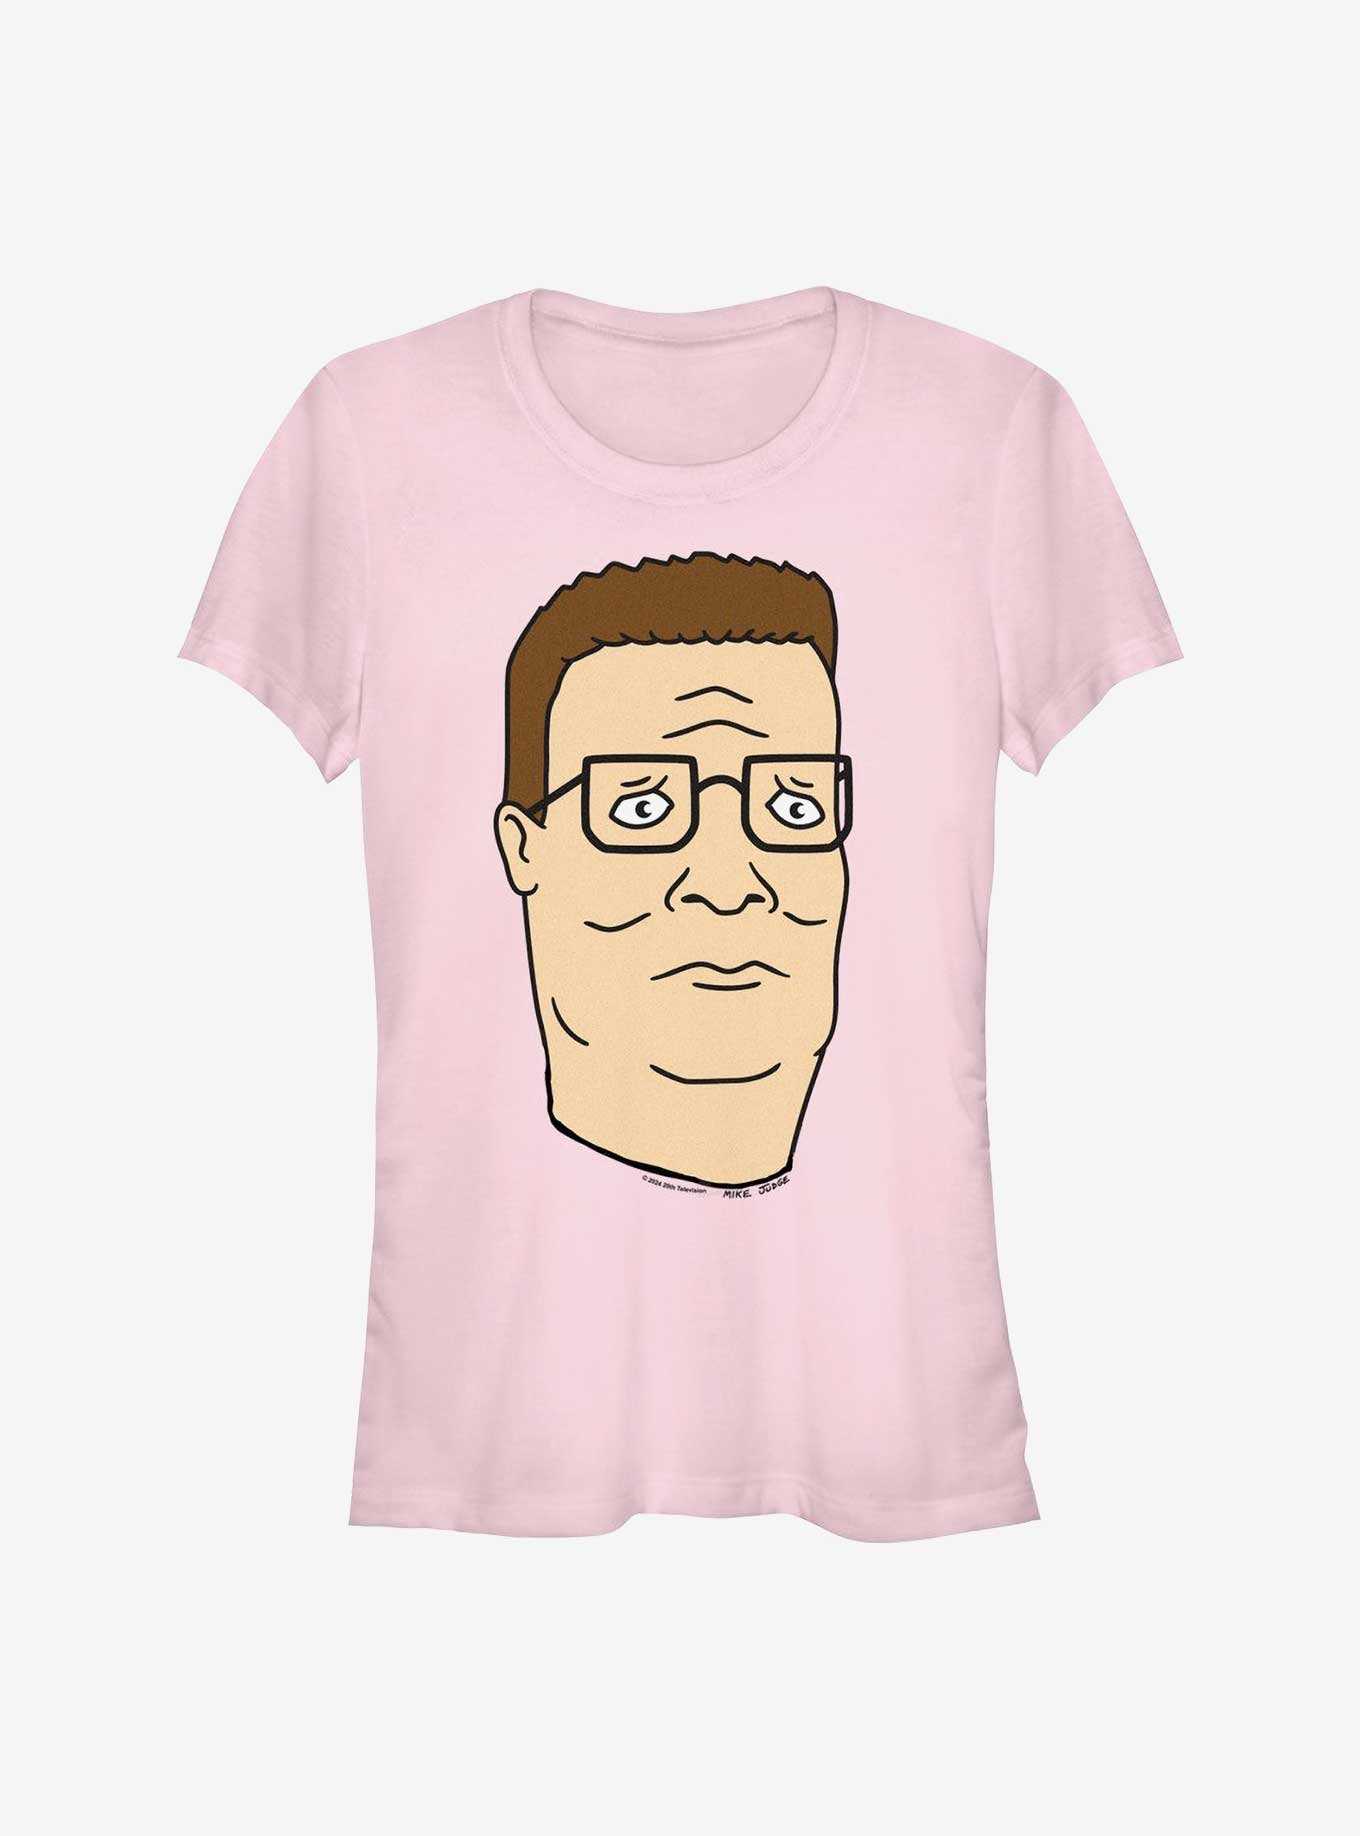 King of the Hill Hank Face Girls T-Shirt, , hi-res